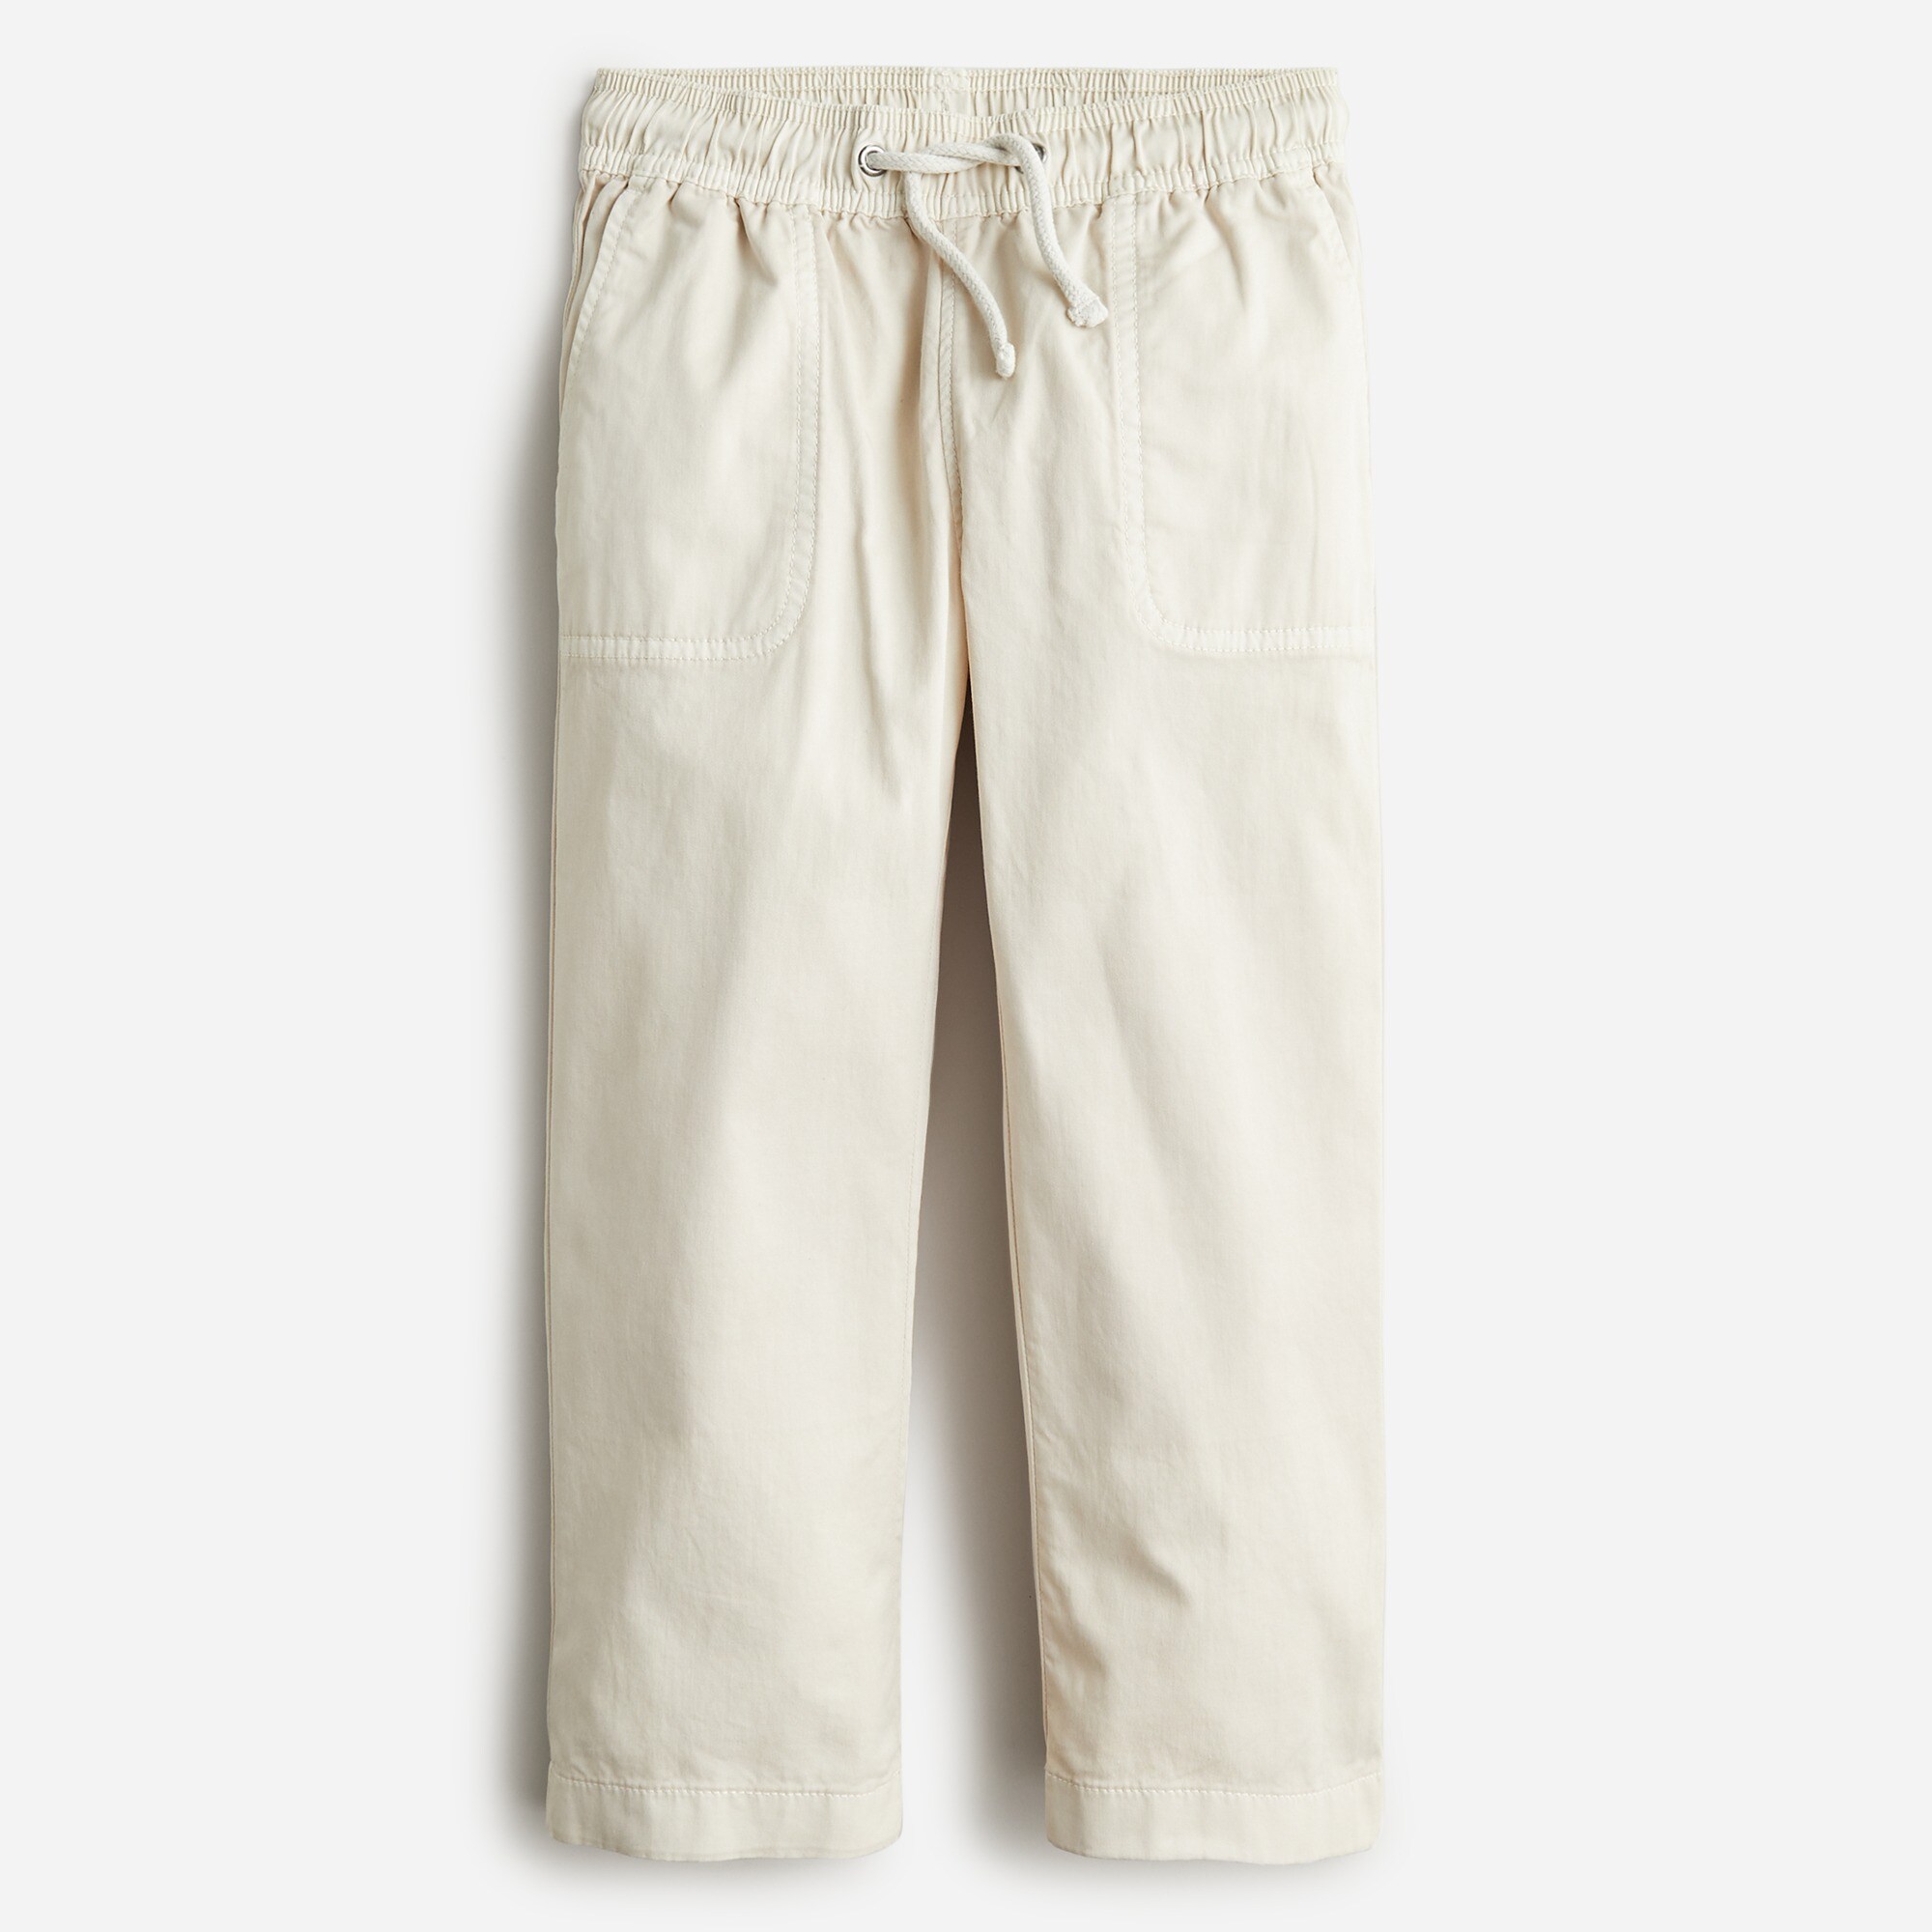 / J Crew Brand LOOK by crewcuts Boys Pull on Chino Pant